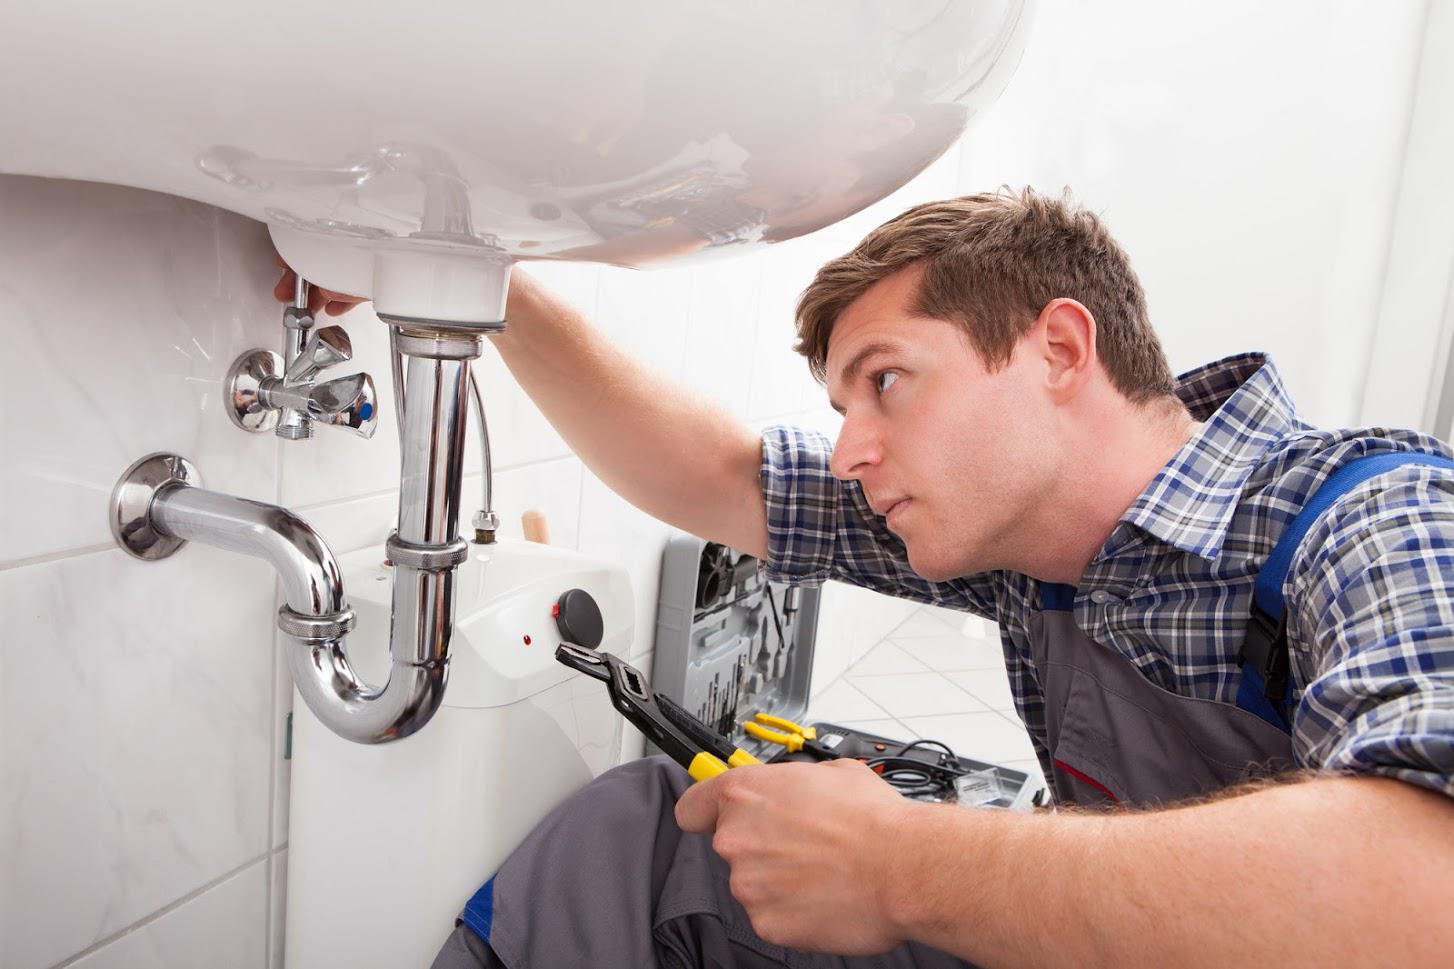 Plumber Checking a House Sink — Elkhart, IN — Roto-Rooter Sewer - Drain Services